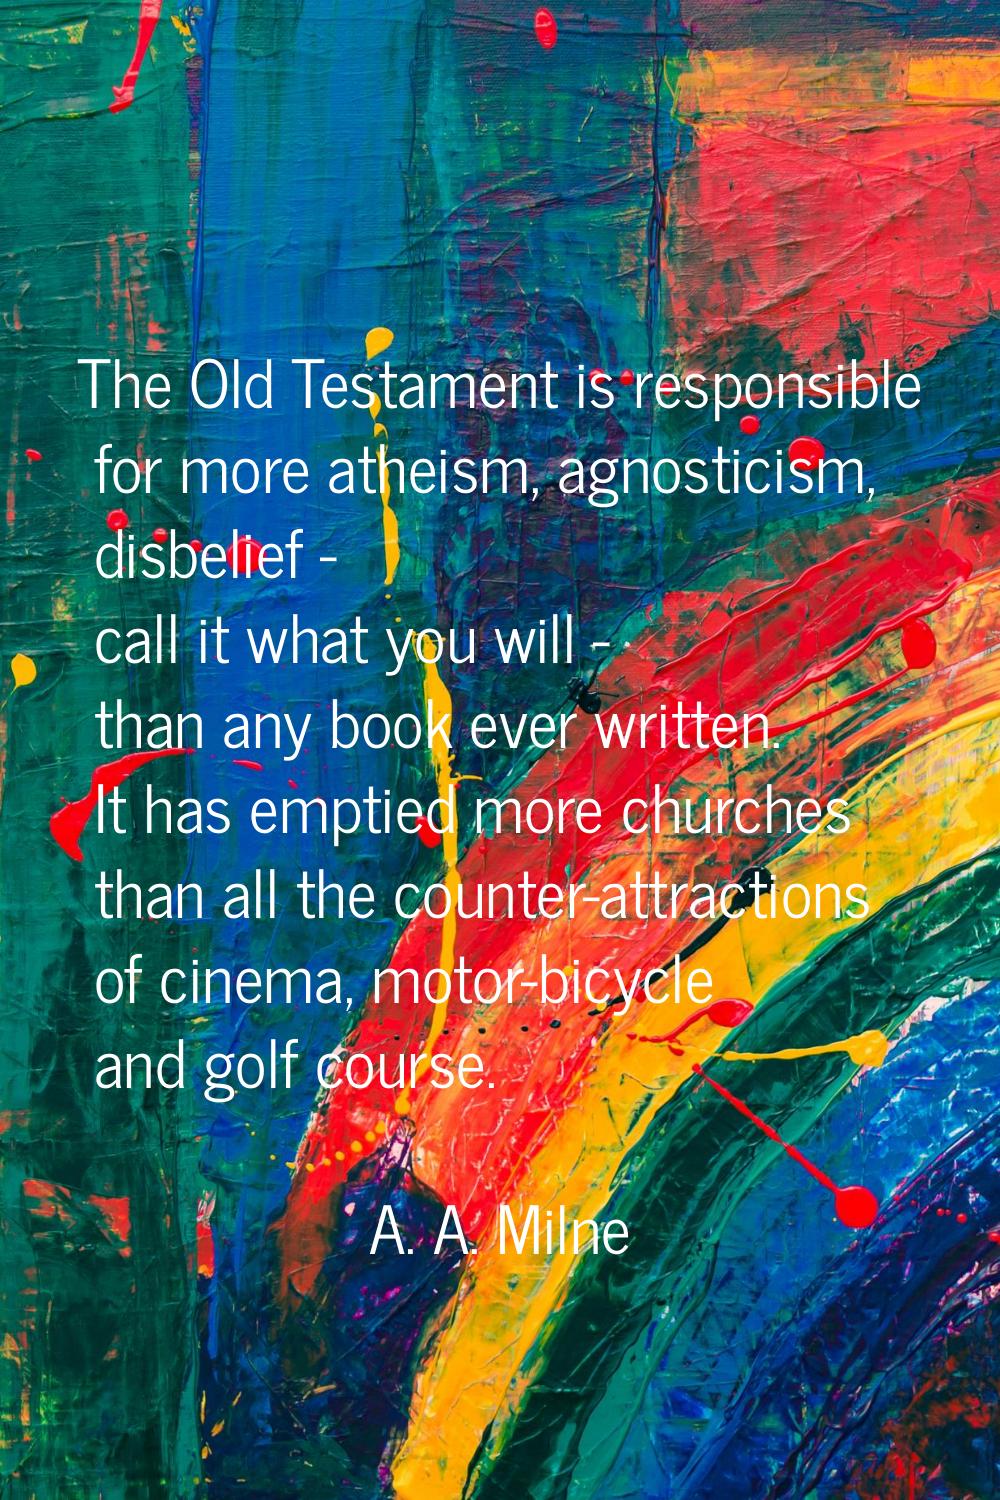 The Old Testament is responsible for more atheism, agnosticism, disbelief - call it what you will -